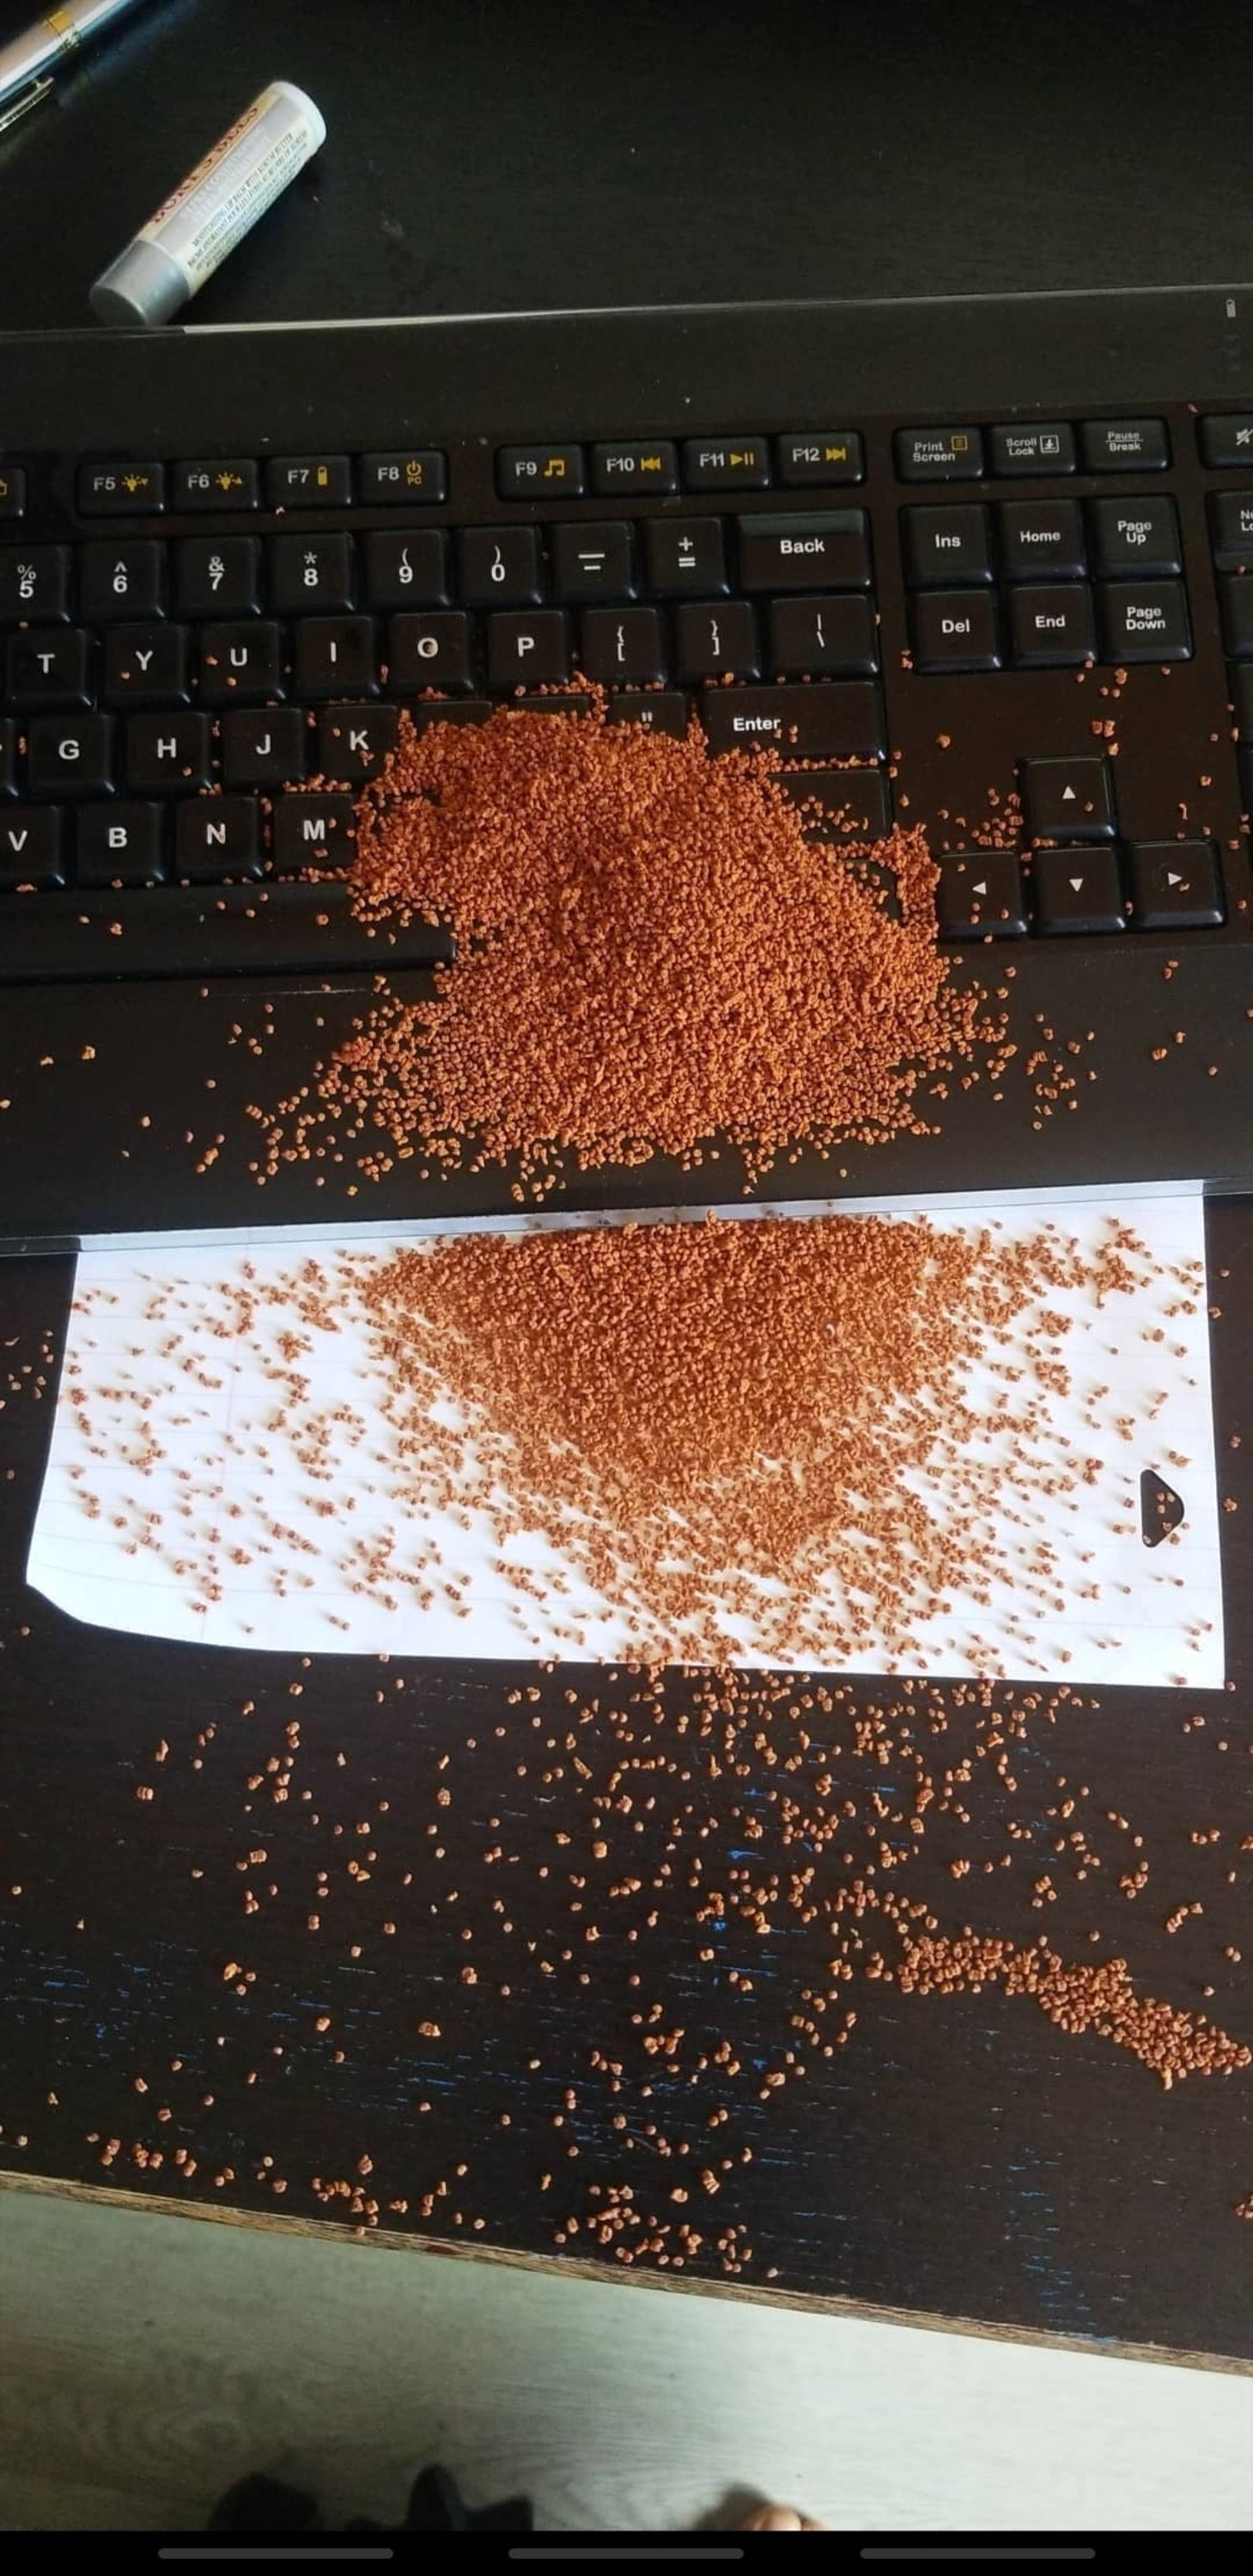 &quot;I spilled fish food all over my computer&quot;